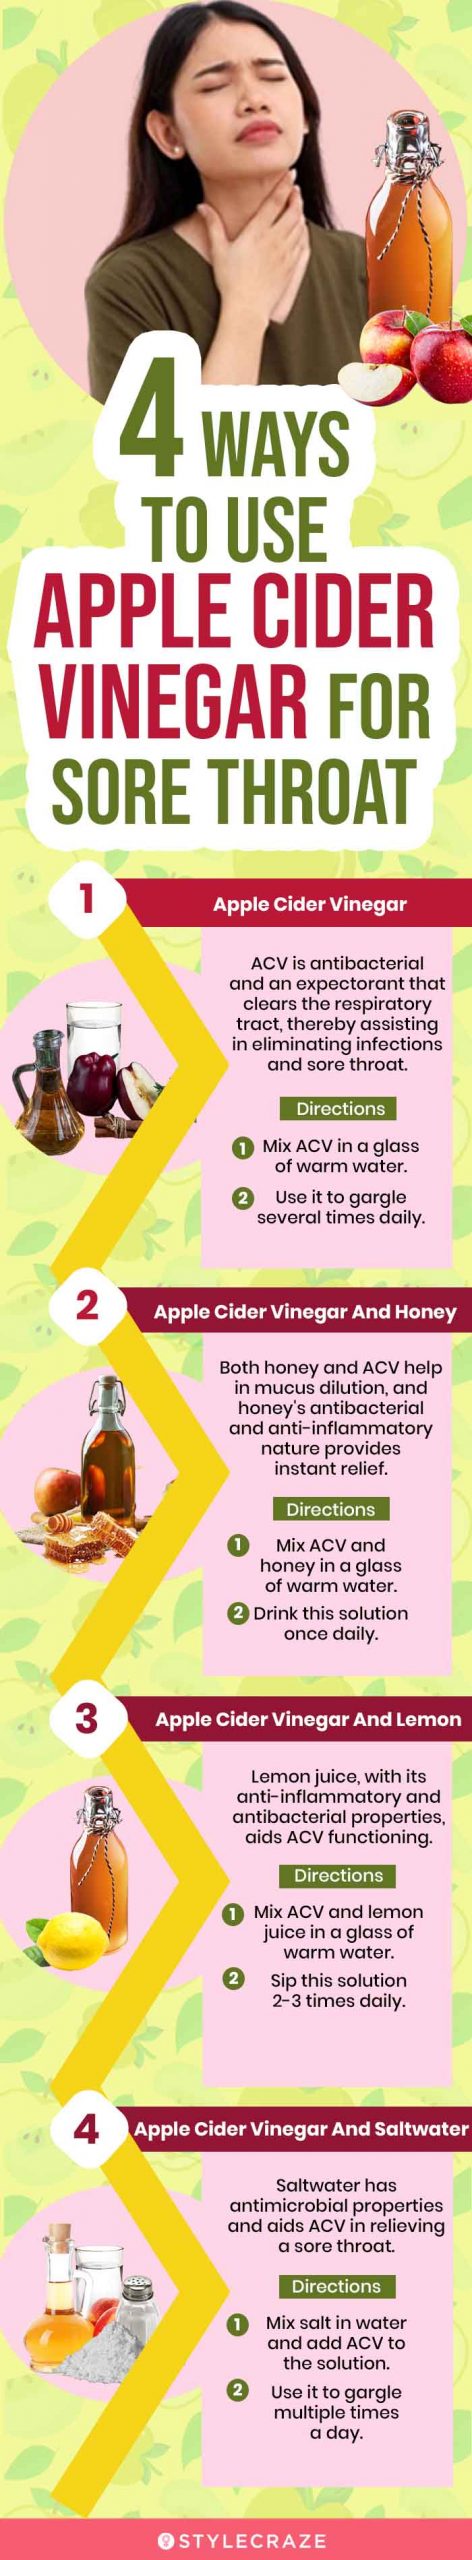 4 ways to use apple cider vinegar for sore throat (infographic)